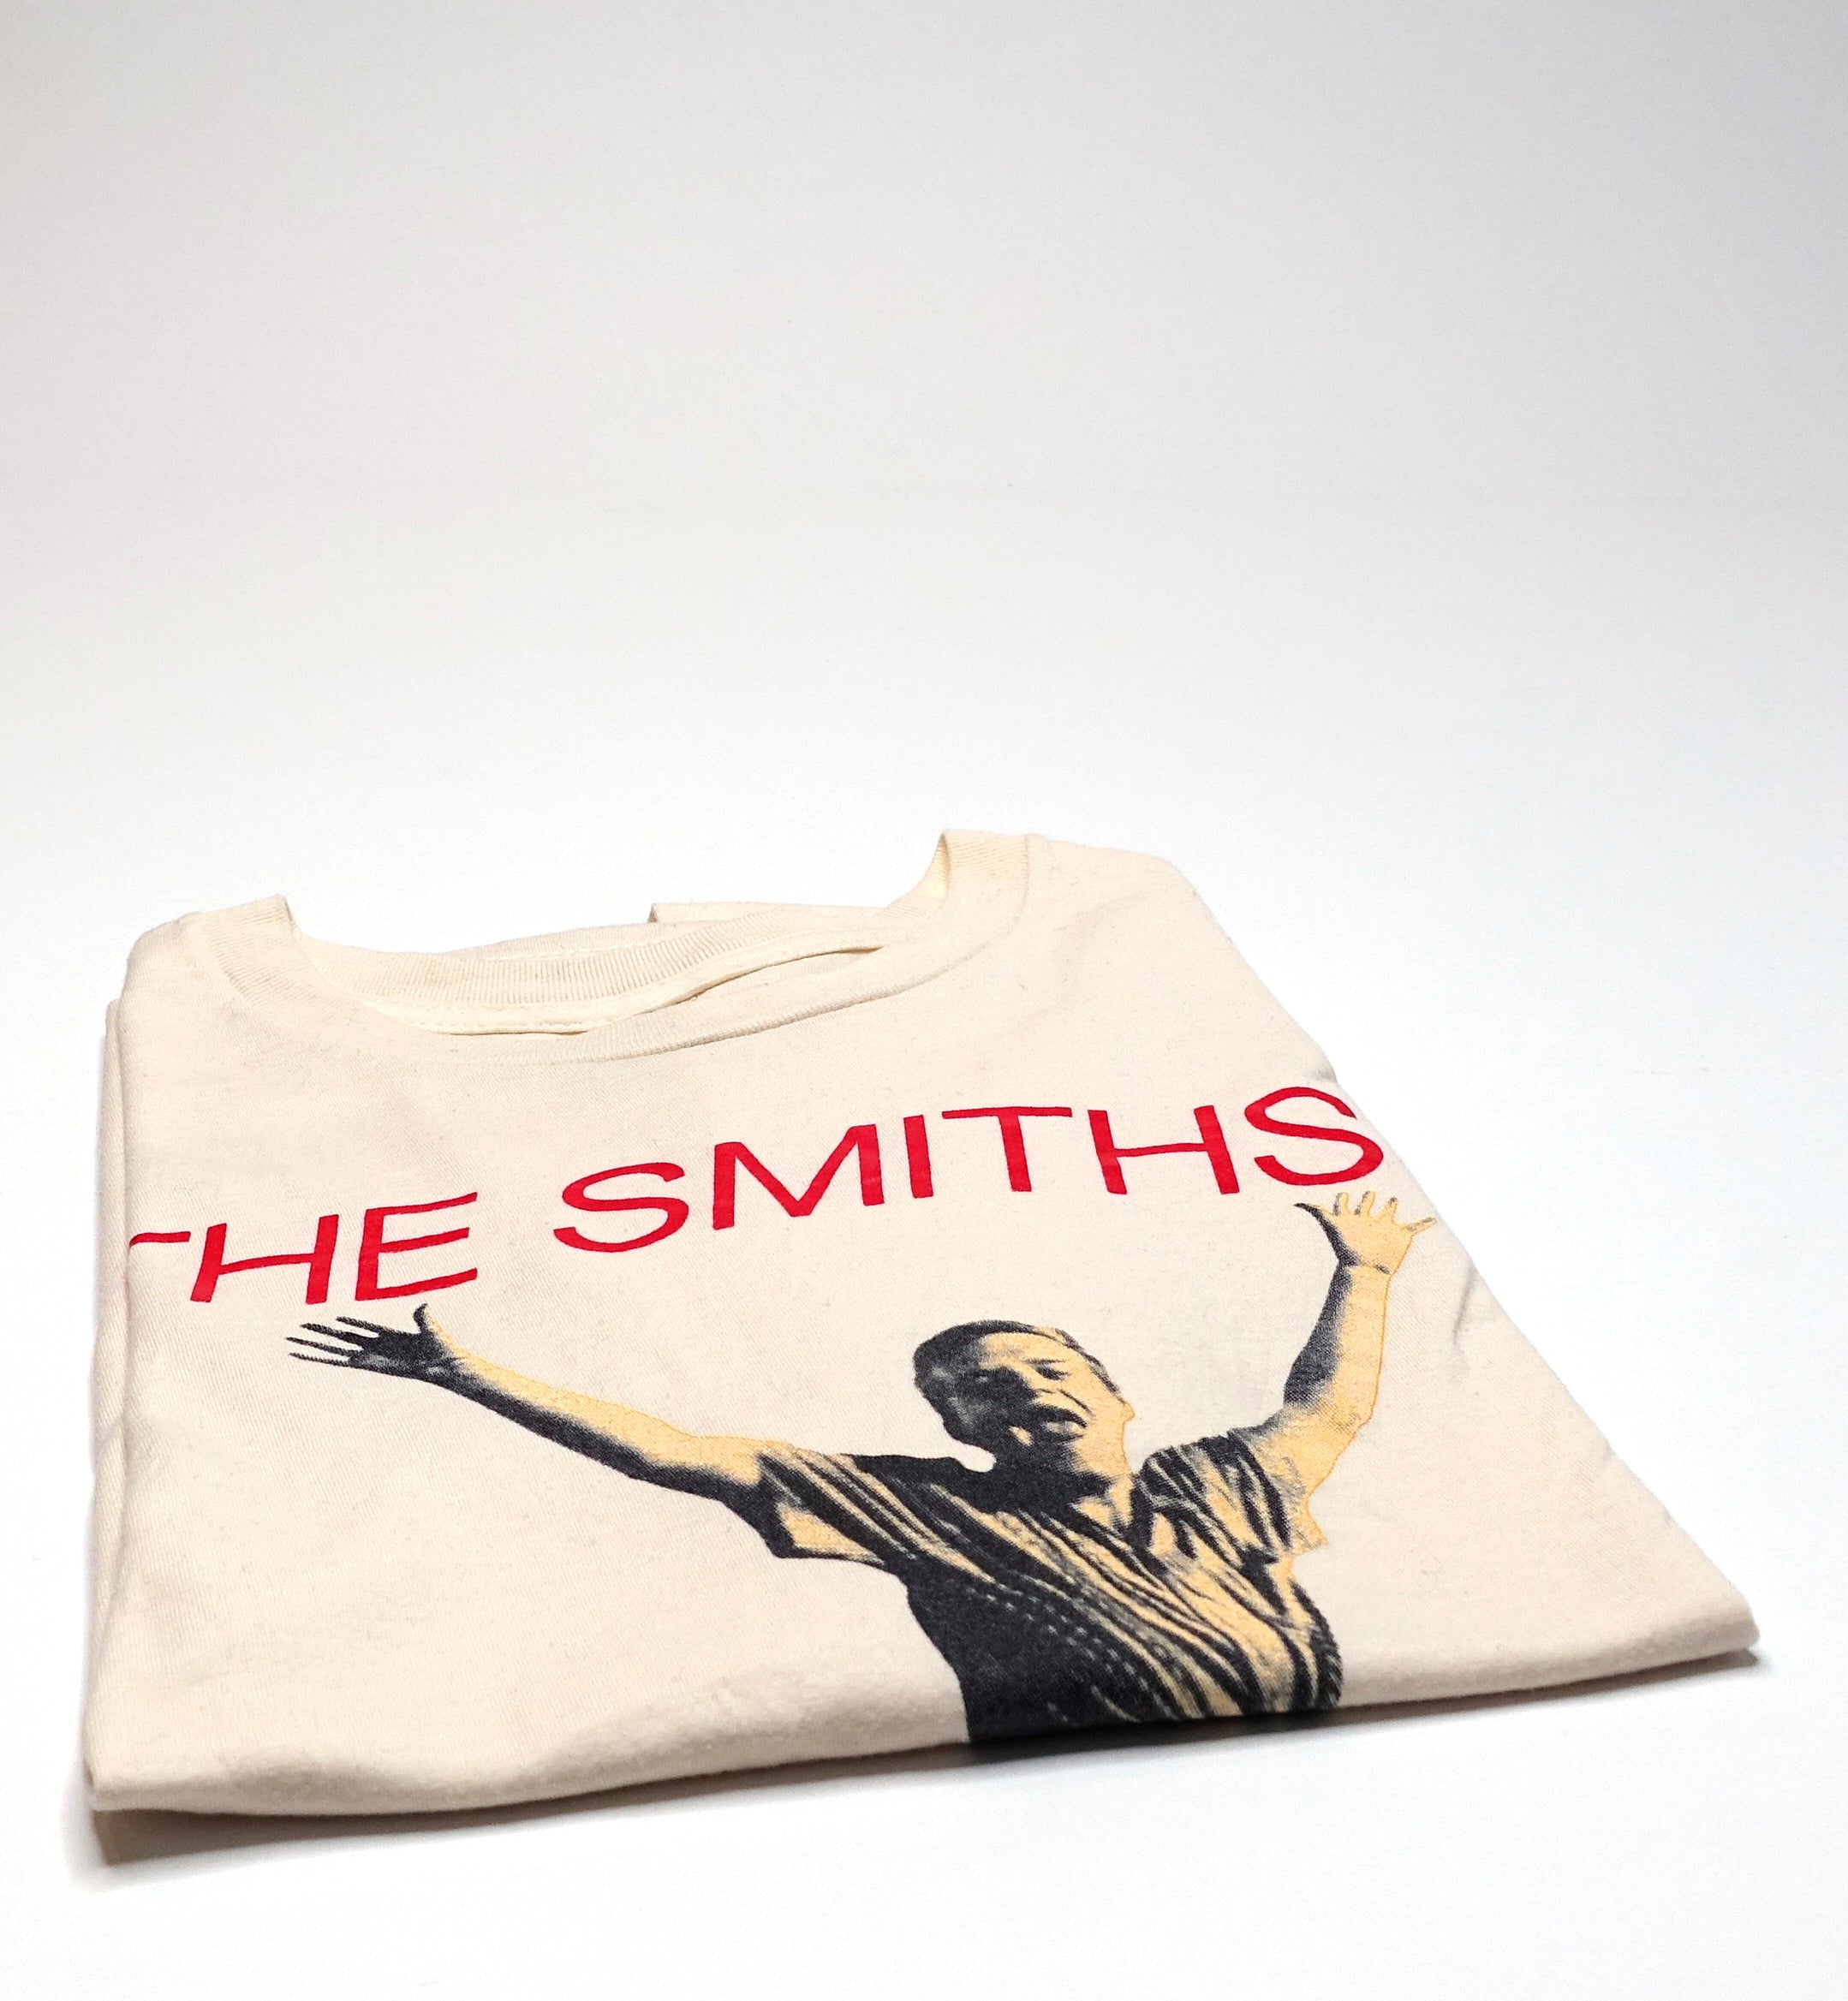 the Smiths - The Boy With The Thorn in His Side Shirt (Bootleg by Me) Size Large